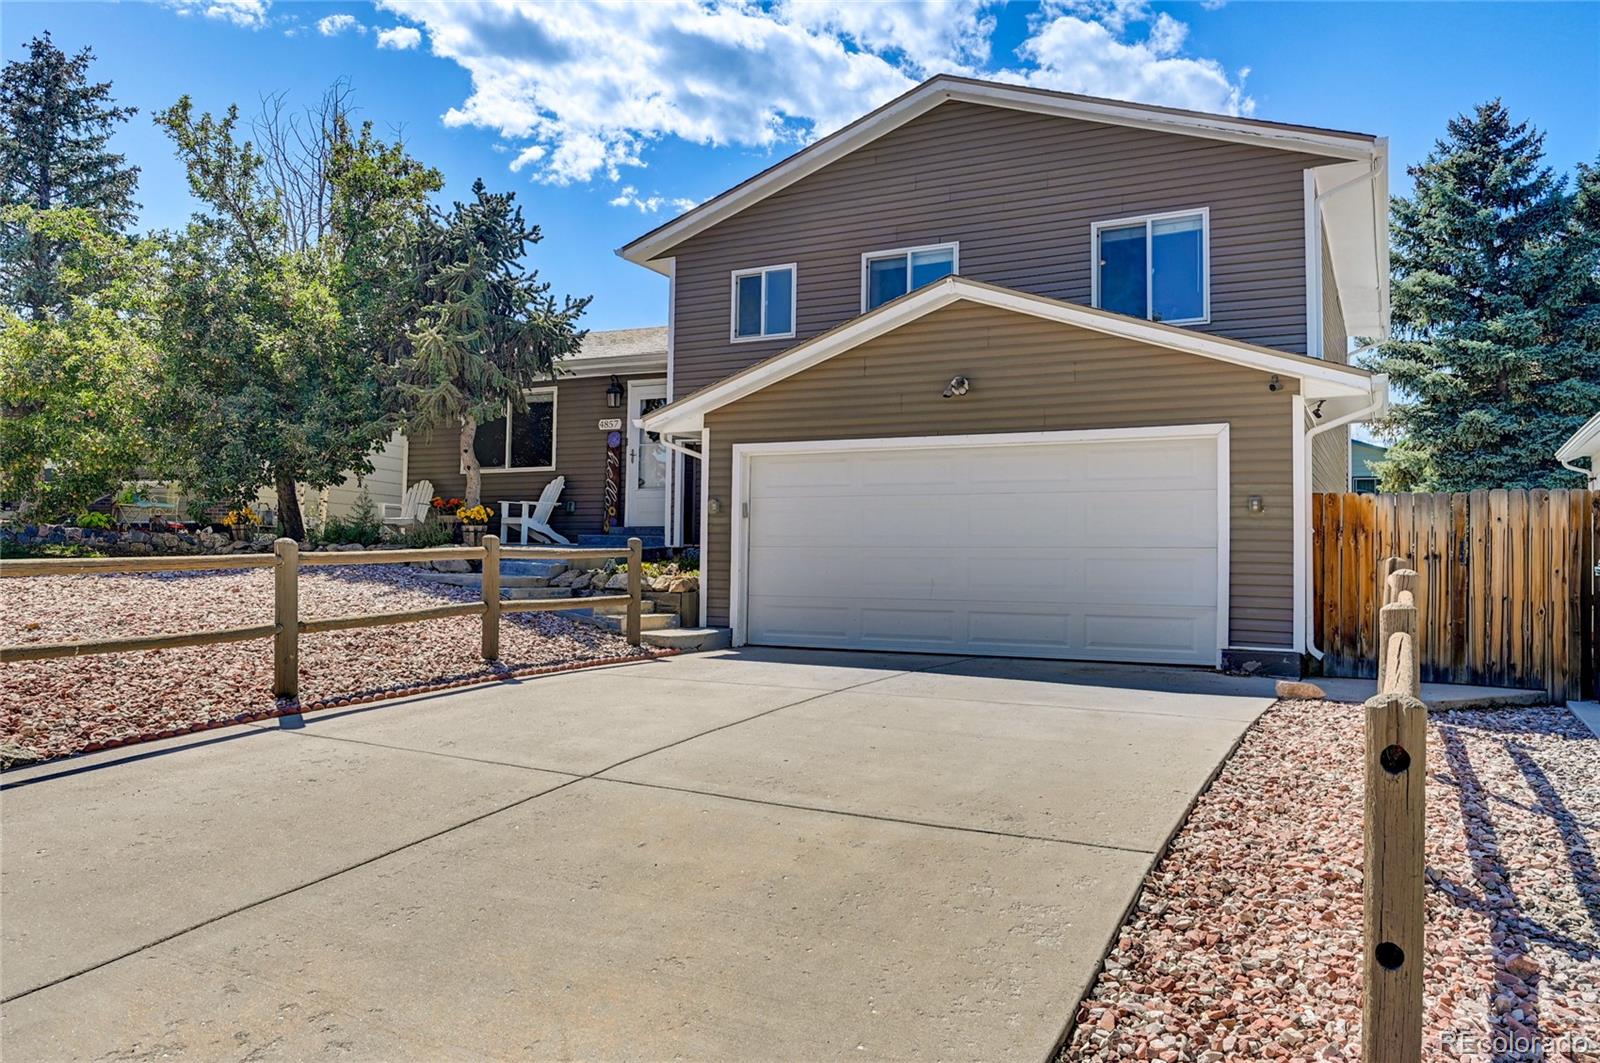 Report Image for 4857 S Xenophon Way,Morrison, Colorado